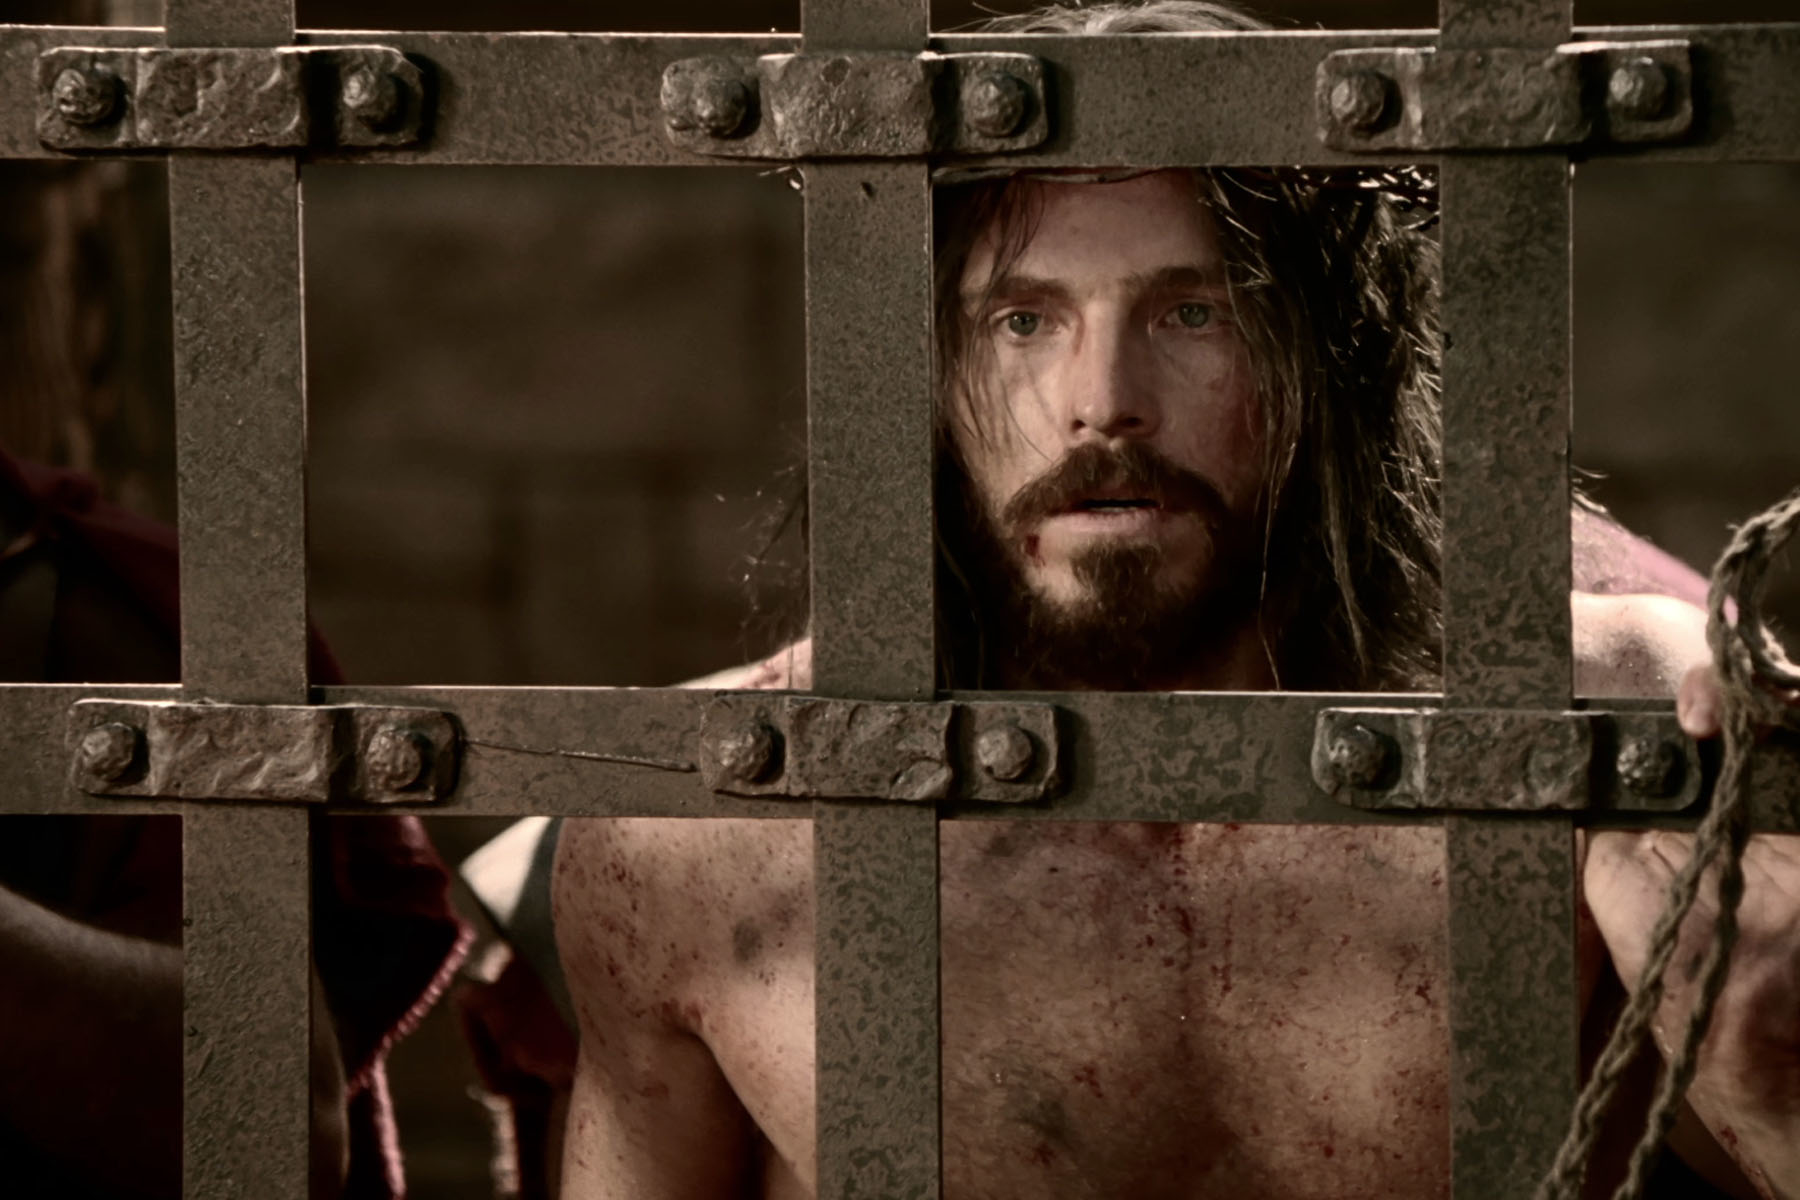 Jesus Is Scourged